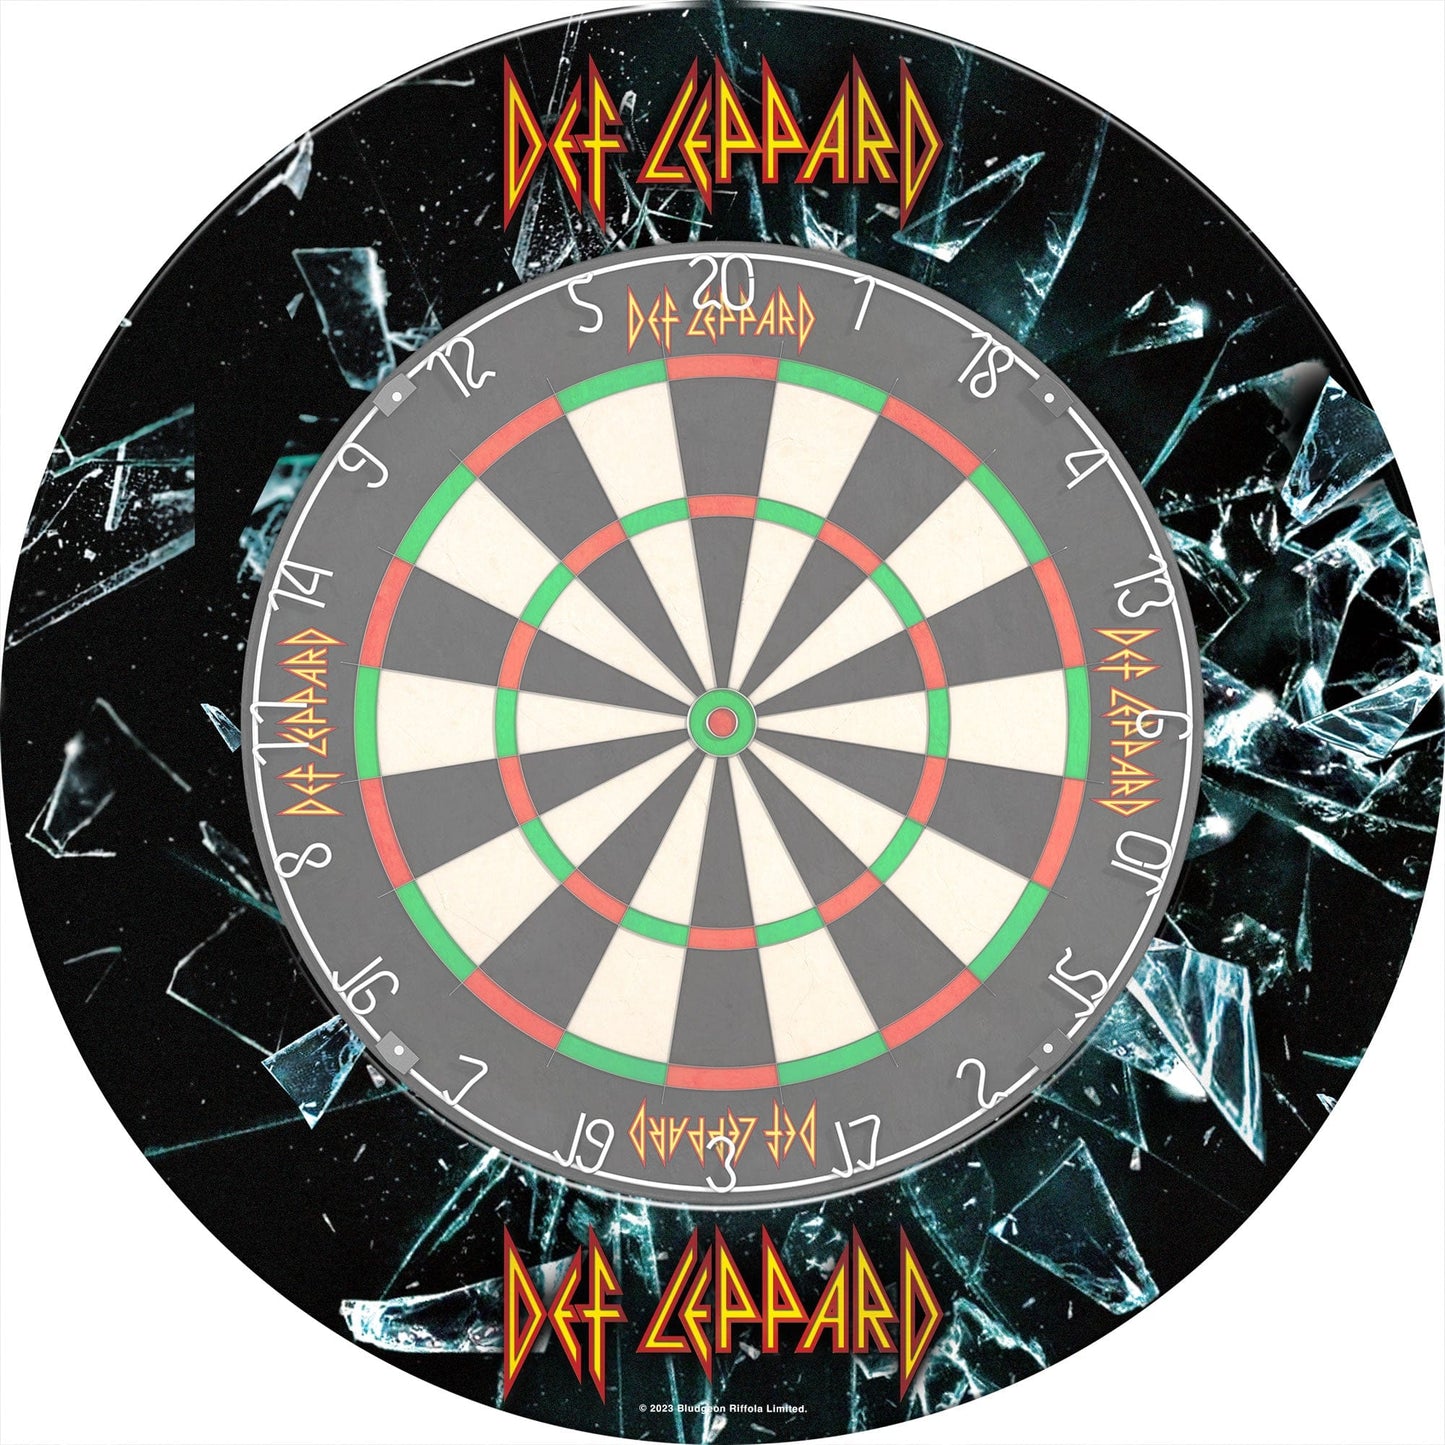 Def Leppard Dartboard Surround - Official Licensed - S2 - Professional - Shattered Glass